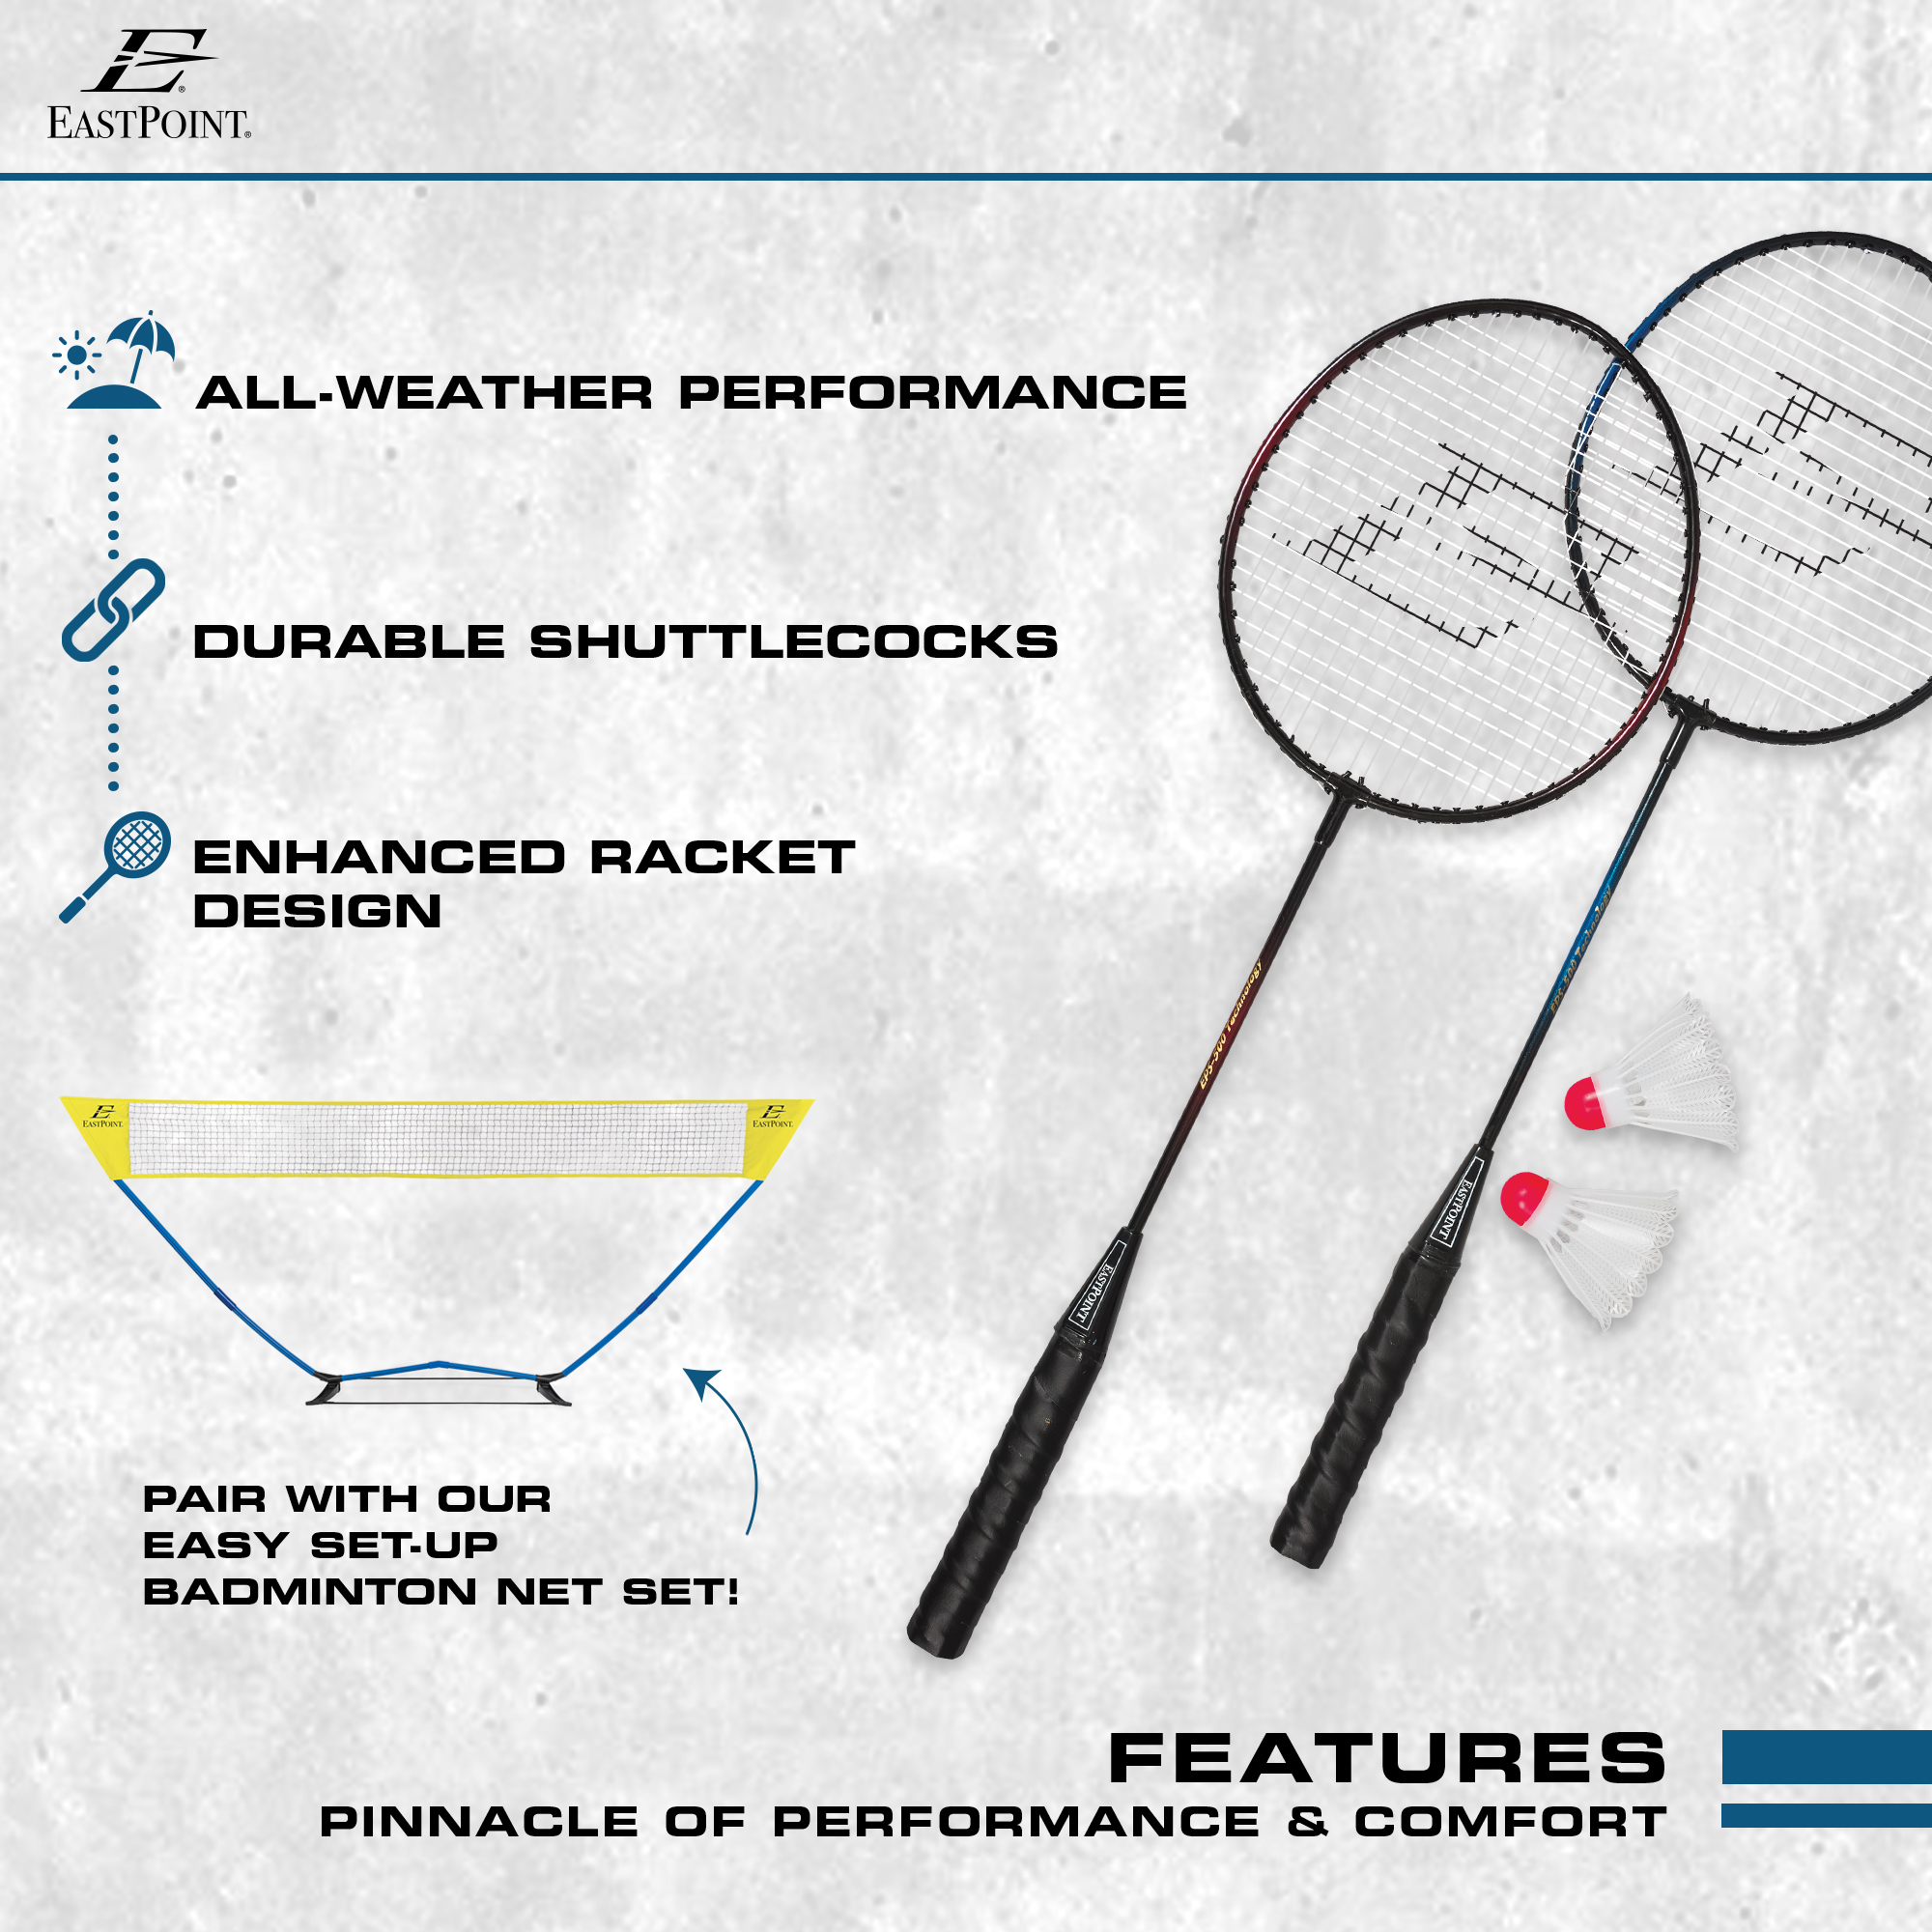 EastPoint Sports 2 Player Badminton Racket Set; Contains 2 Rackets with Tempered Steel Shafts, Comfort Handles and 2 Durable, White Shuttlecock Birdies - image 3 of 7